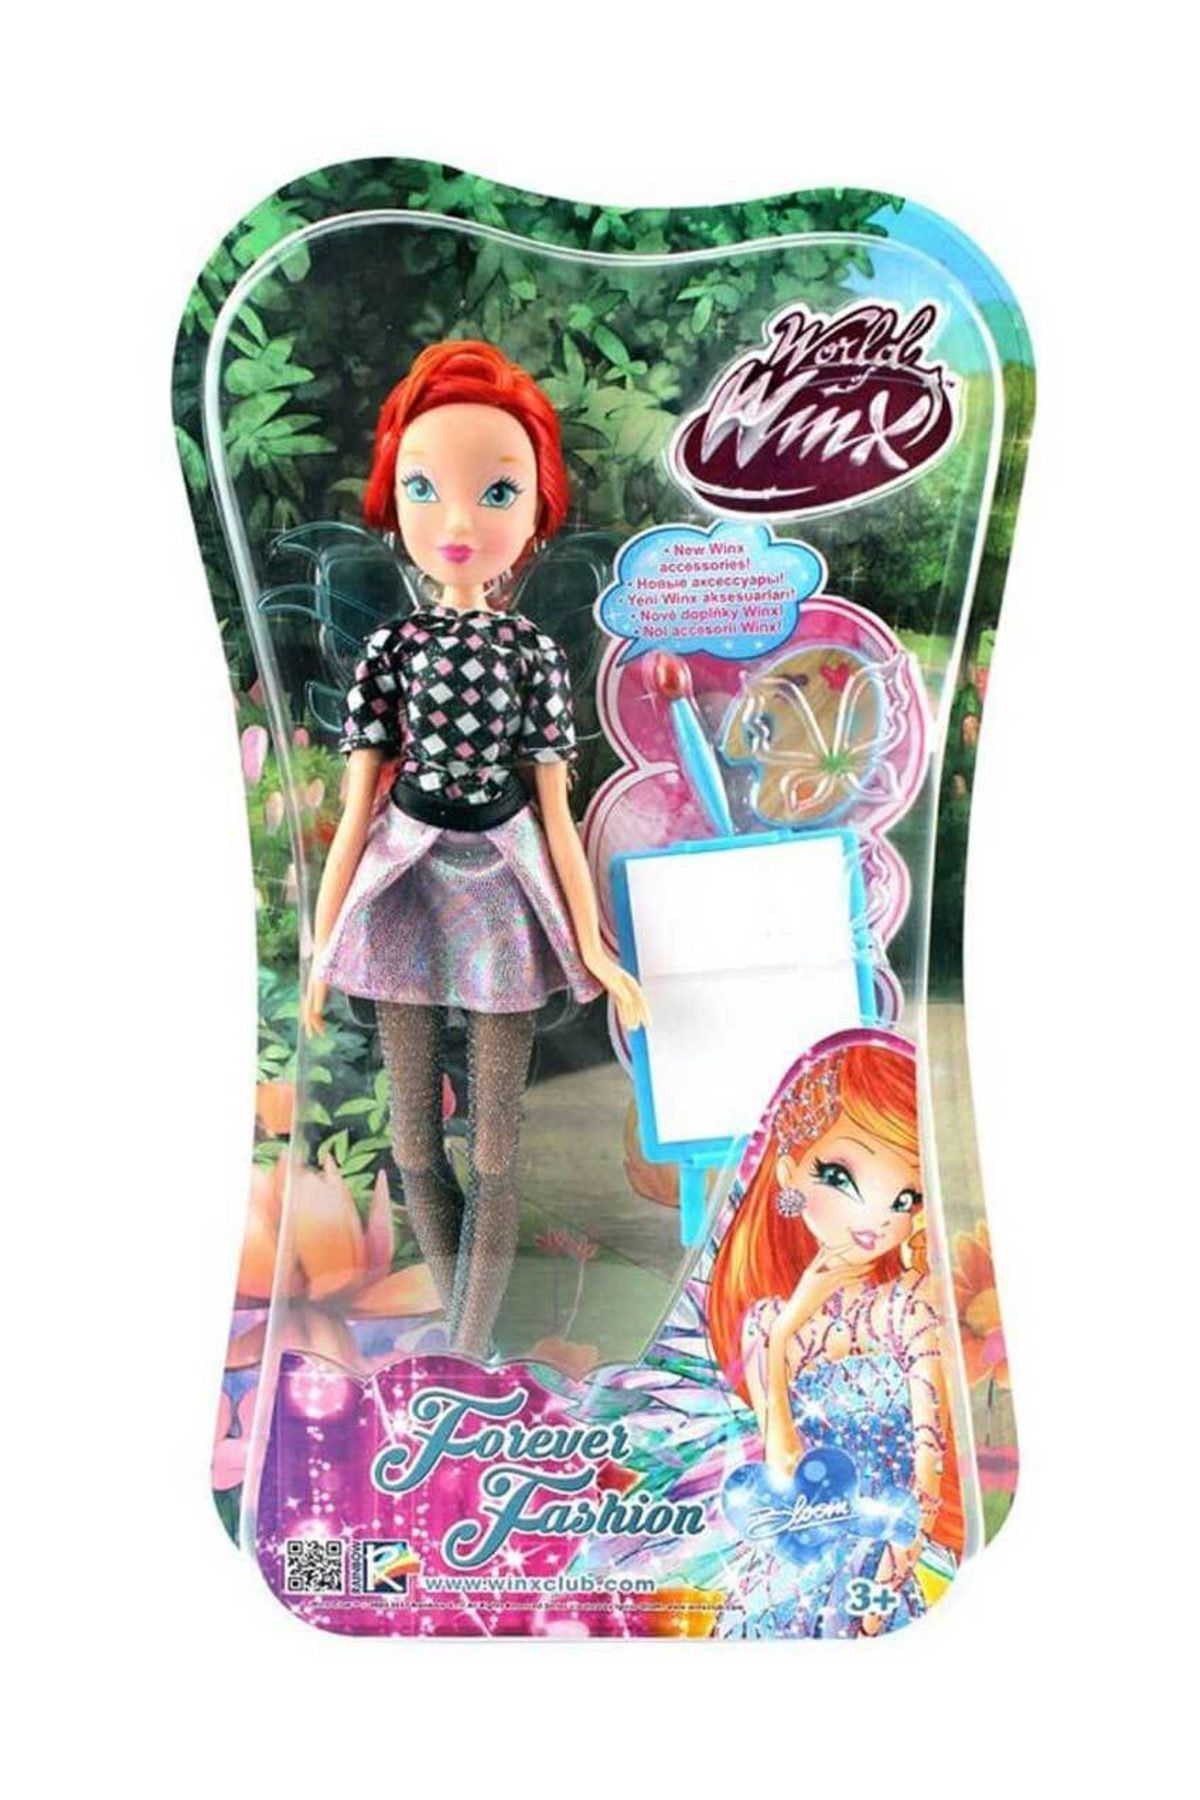 Winx Forever Fashion - Bloom